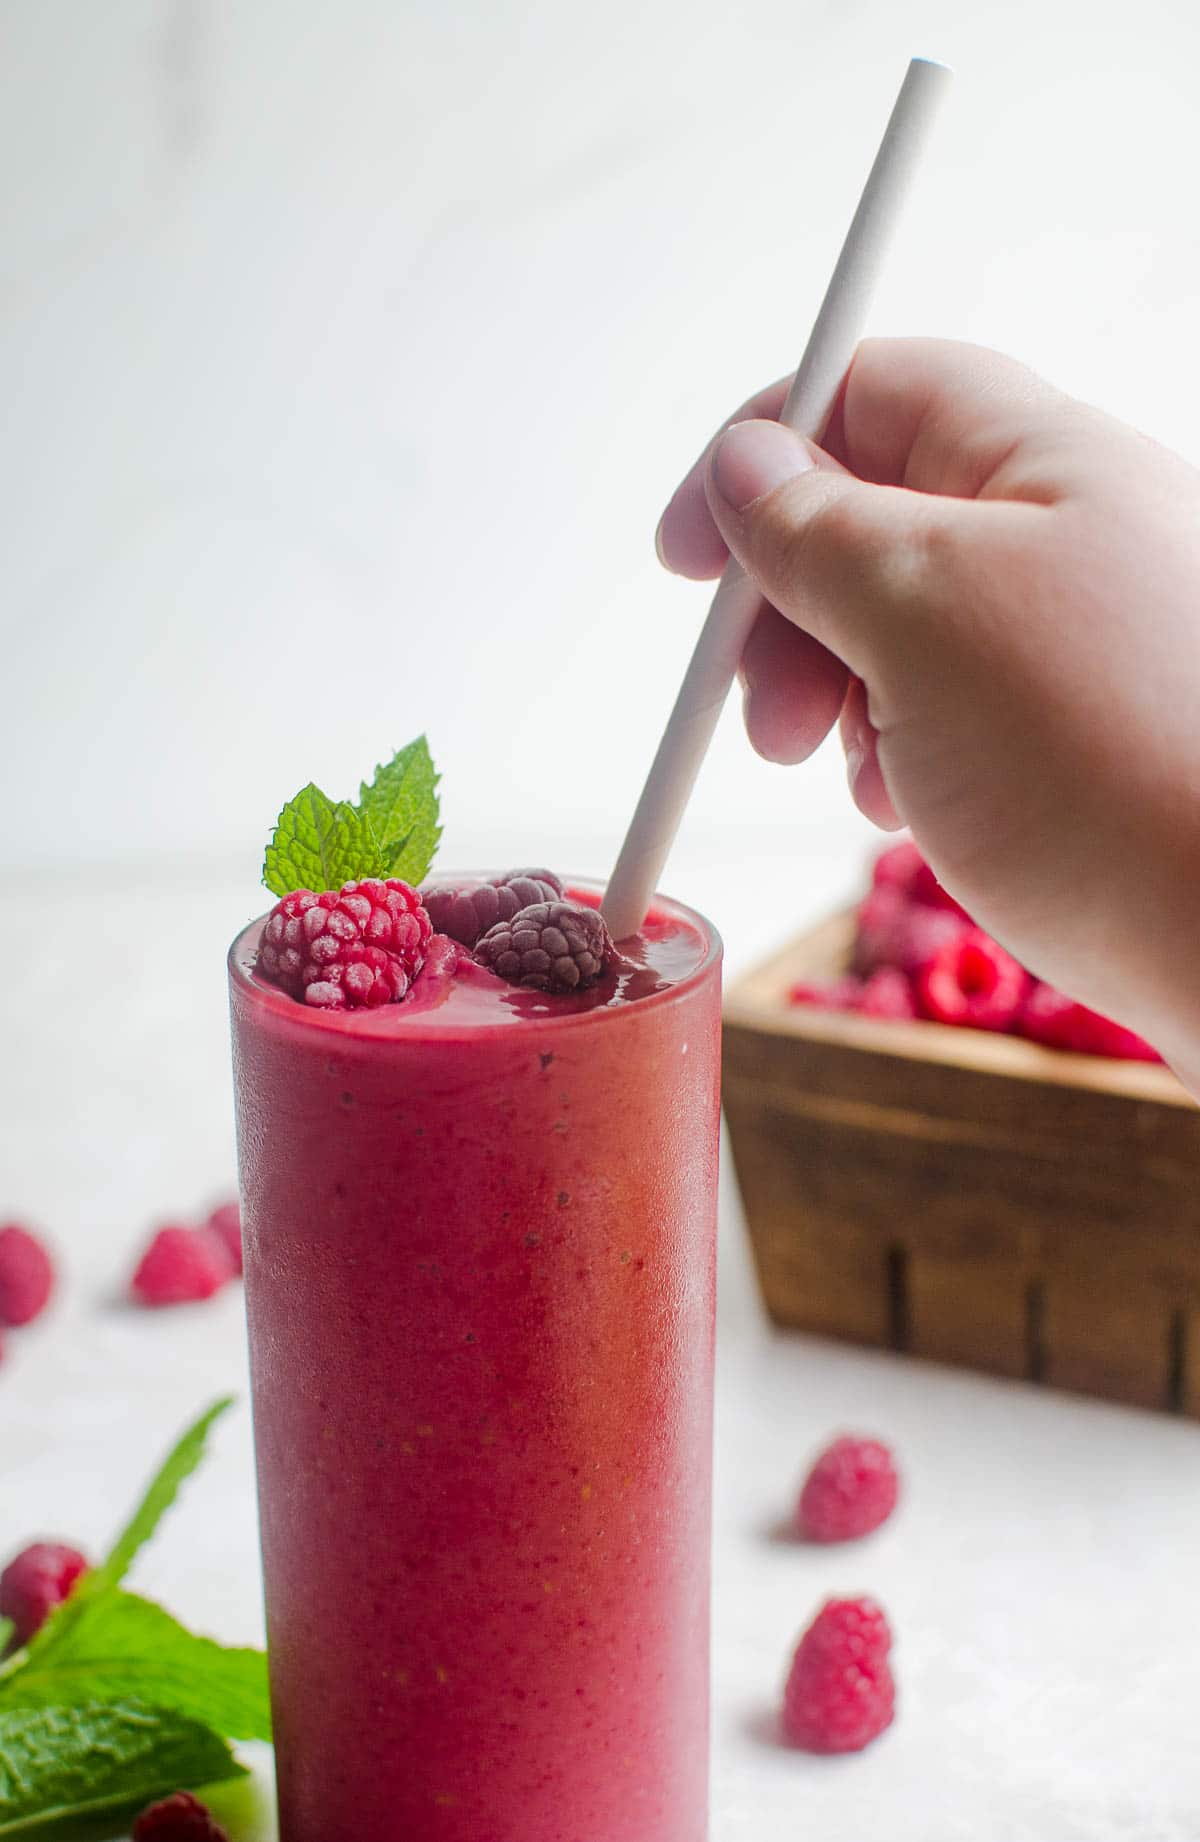 A hand placing a straw into a raspberry smoothie.